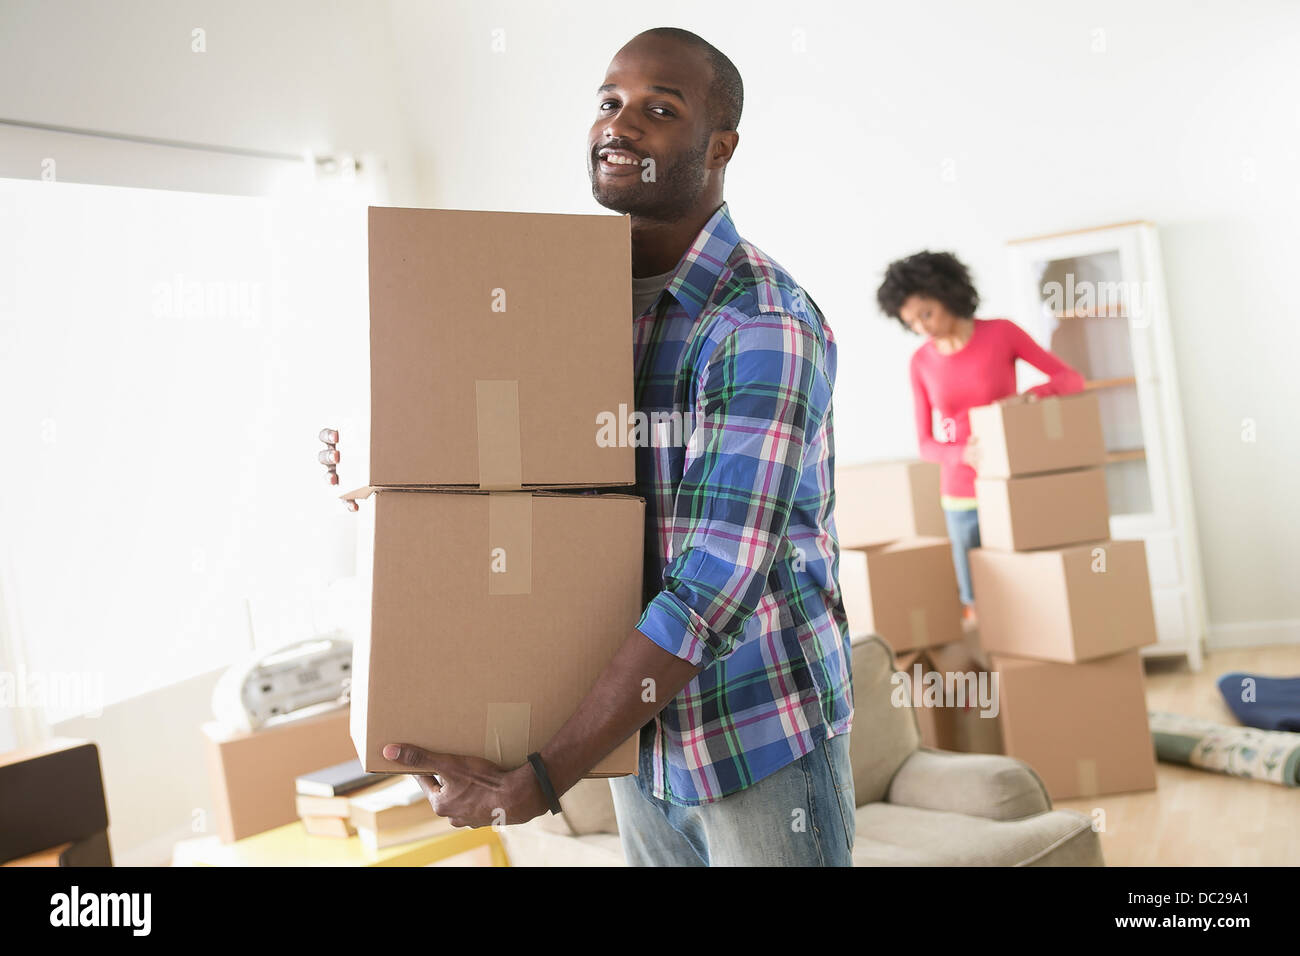 Mid adult man carrying cardboard boxes Stock Photo